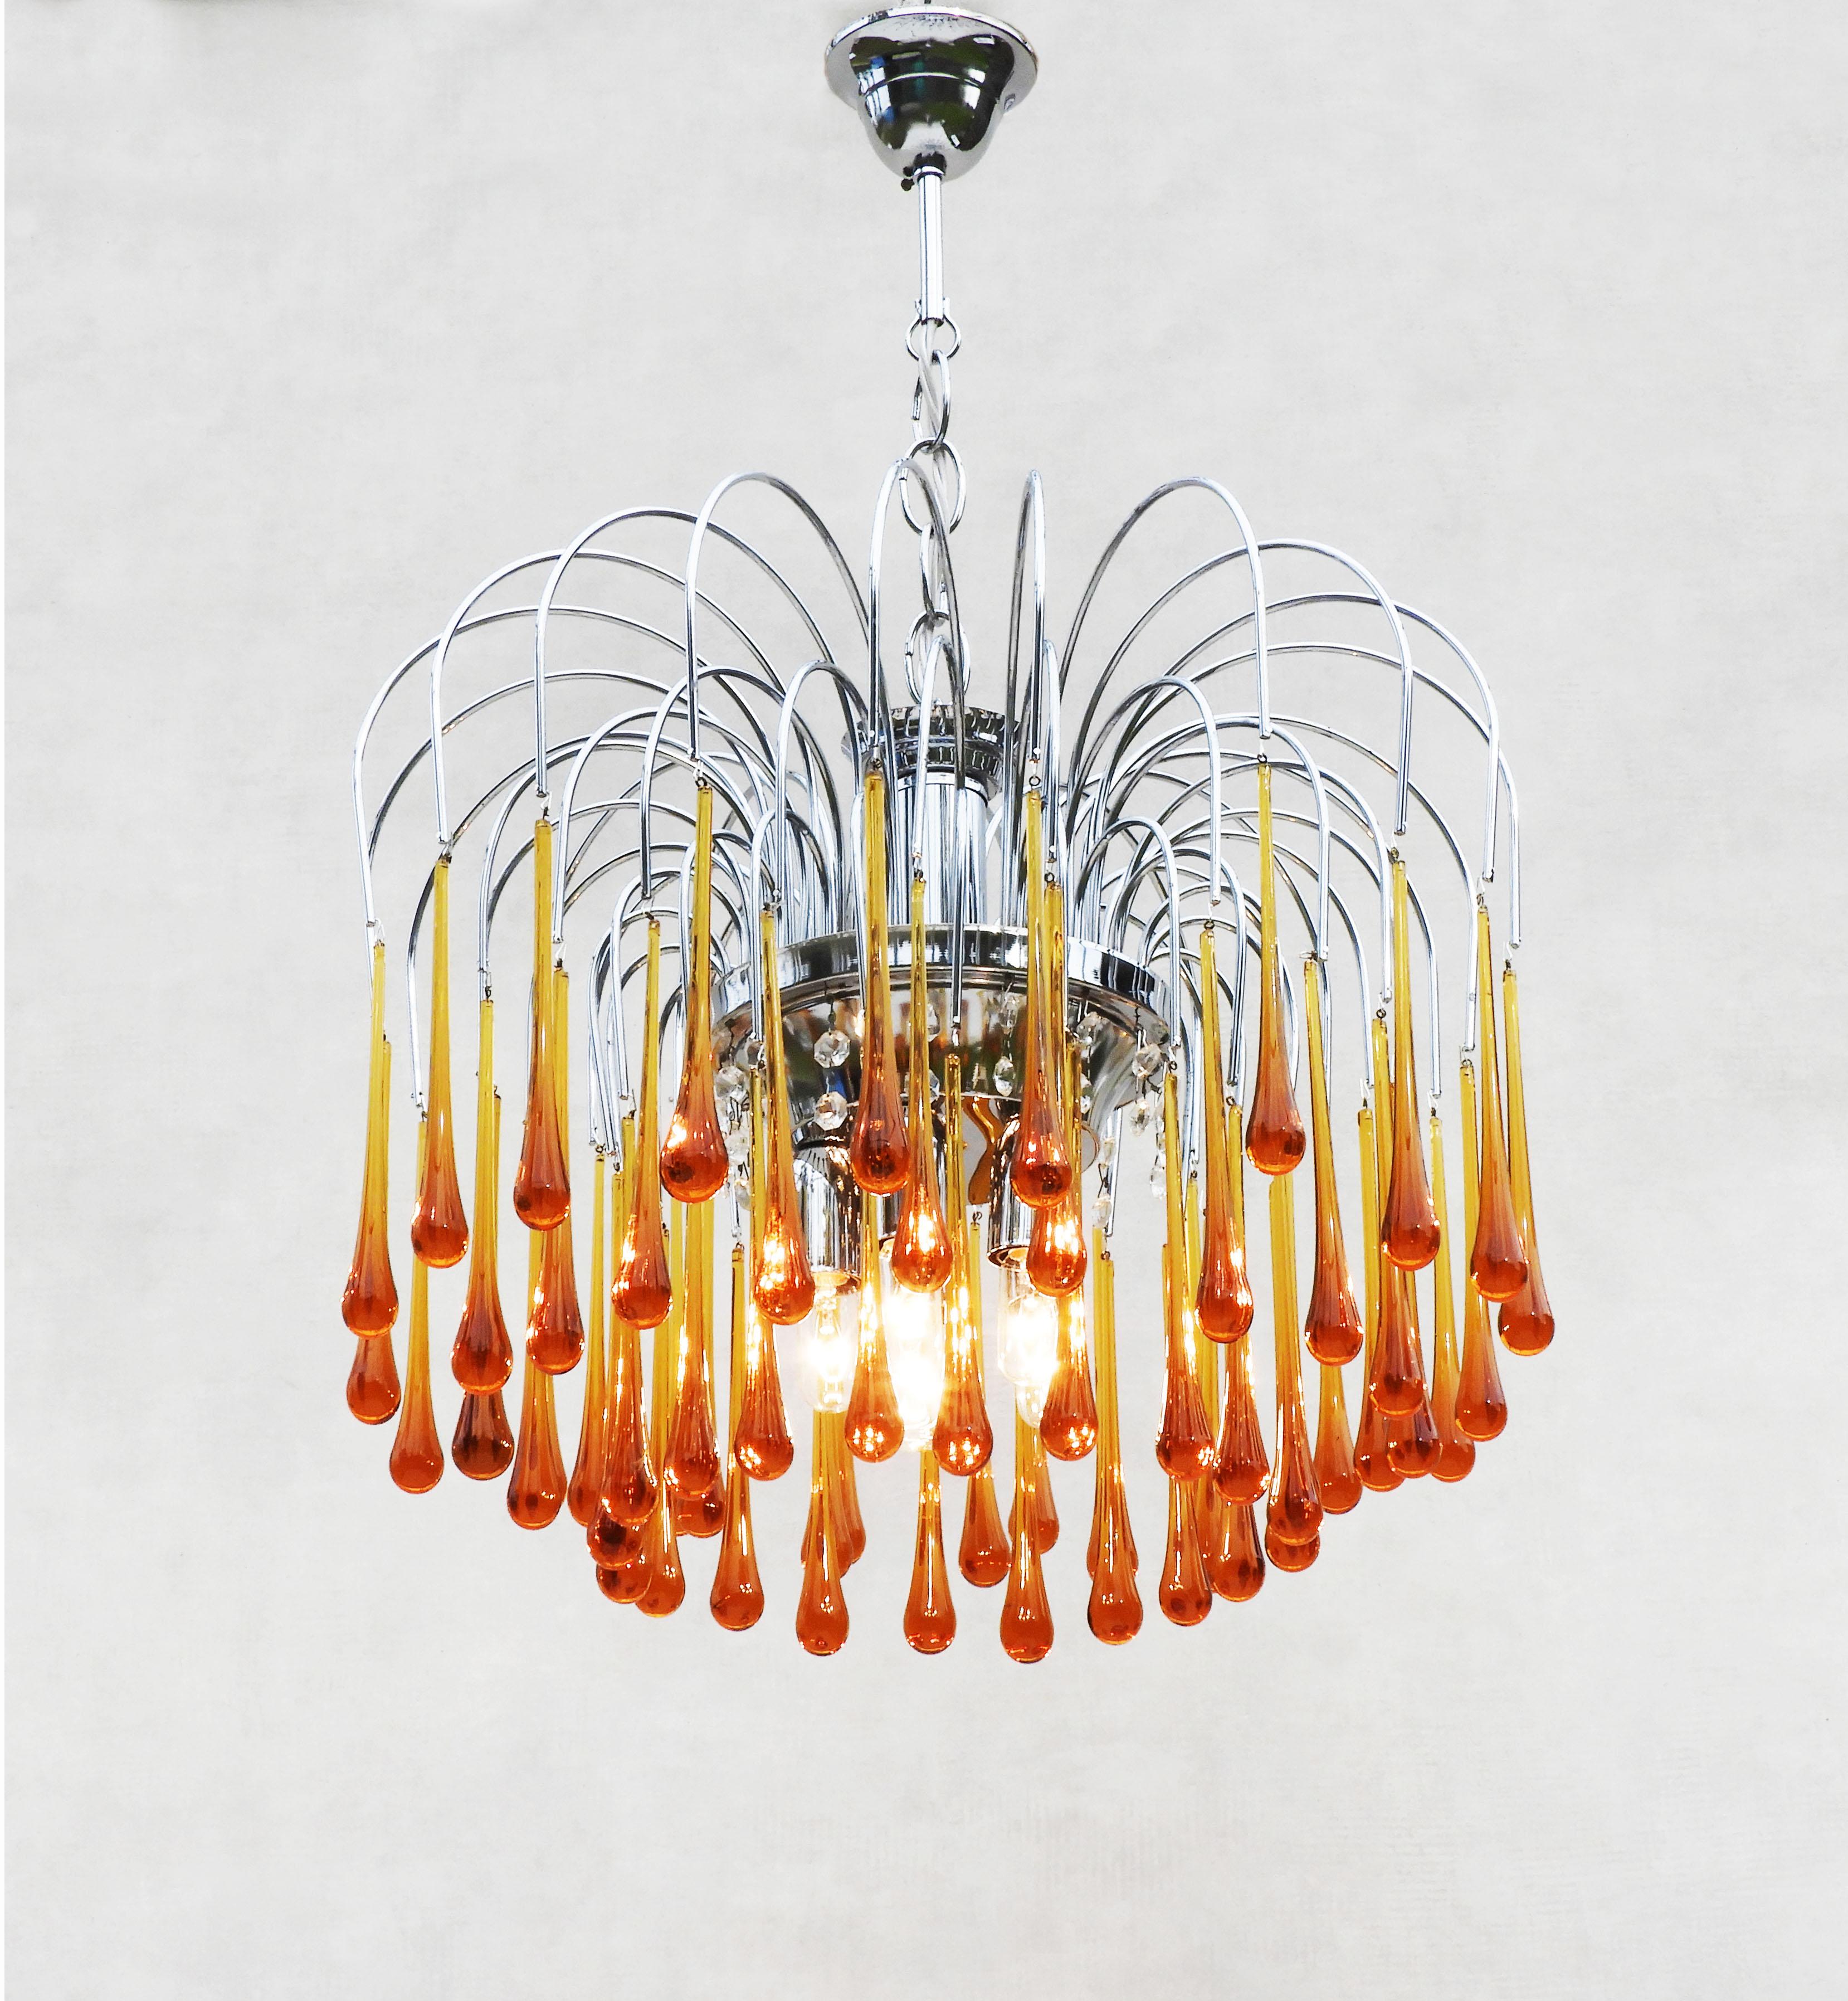 Iconic Paulo Venini-style waterfall pendant chandelier C1960s Italy.
Beautiful Italian Murano glass cascade pendant light with 60 warm amber ‘teardrop’ crystals on a three-tier chrome frame. In great vintage condition with a good patina and no